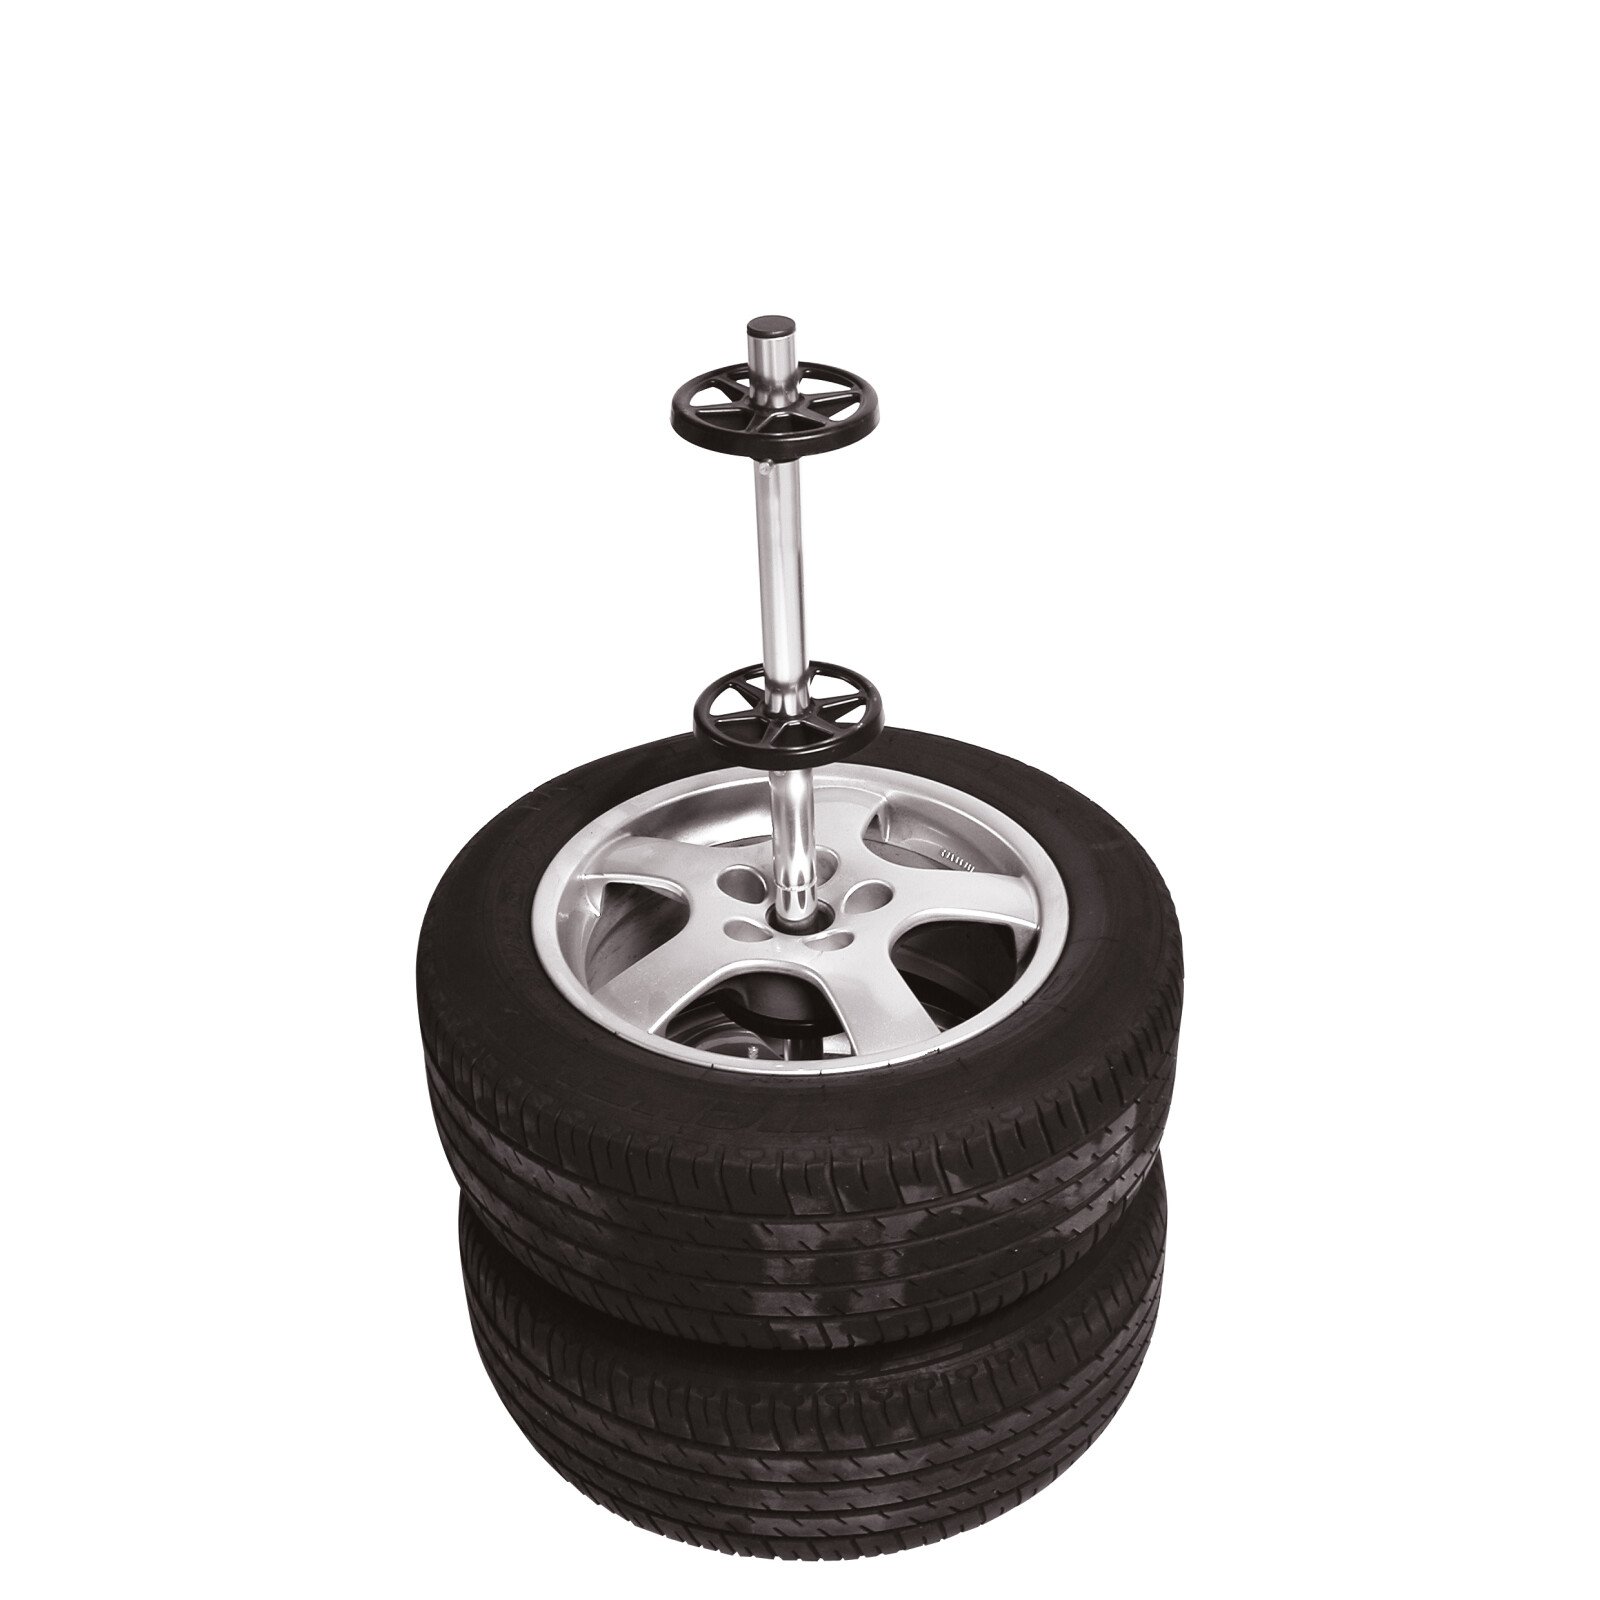 Stand for 4 pcs spare wheels Carpoint thumb